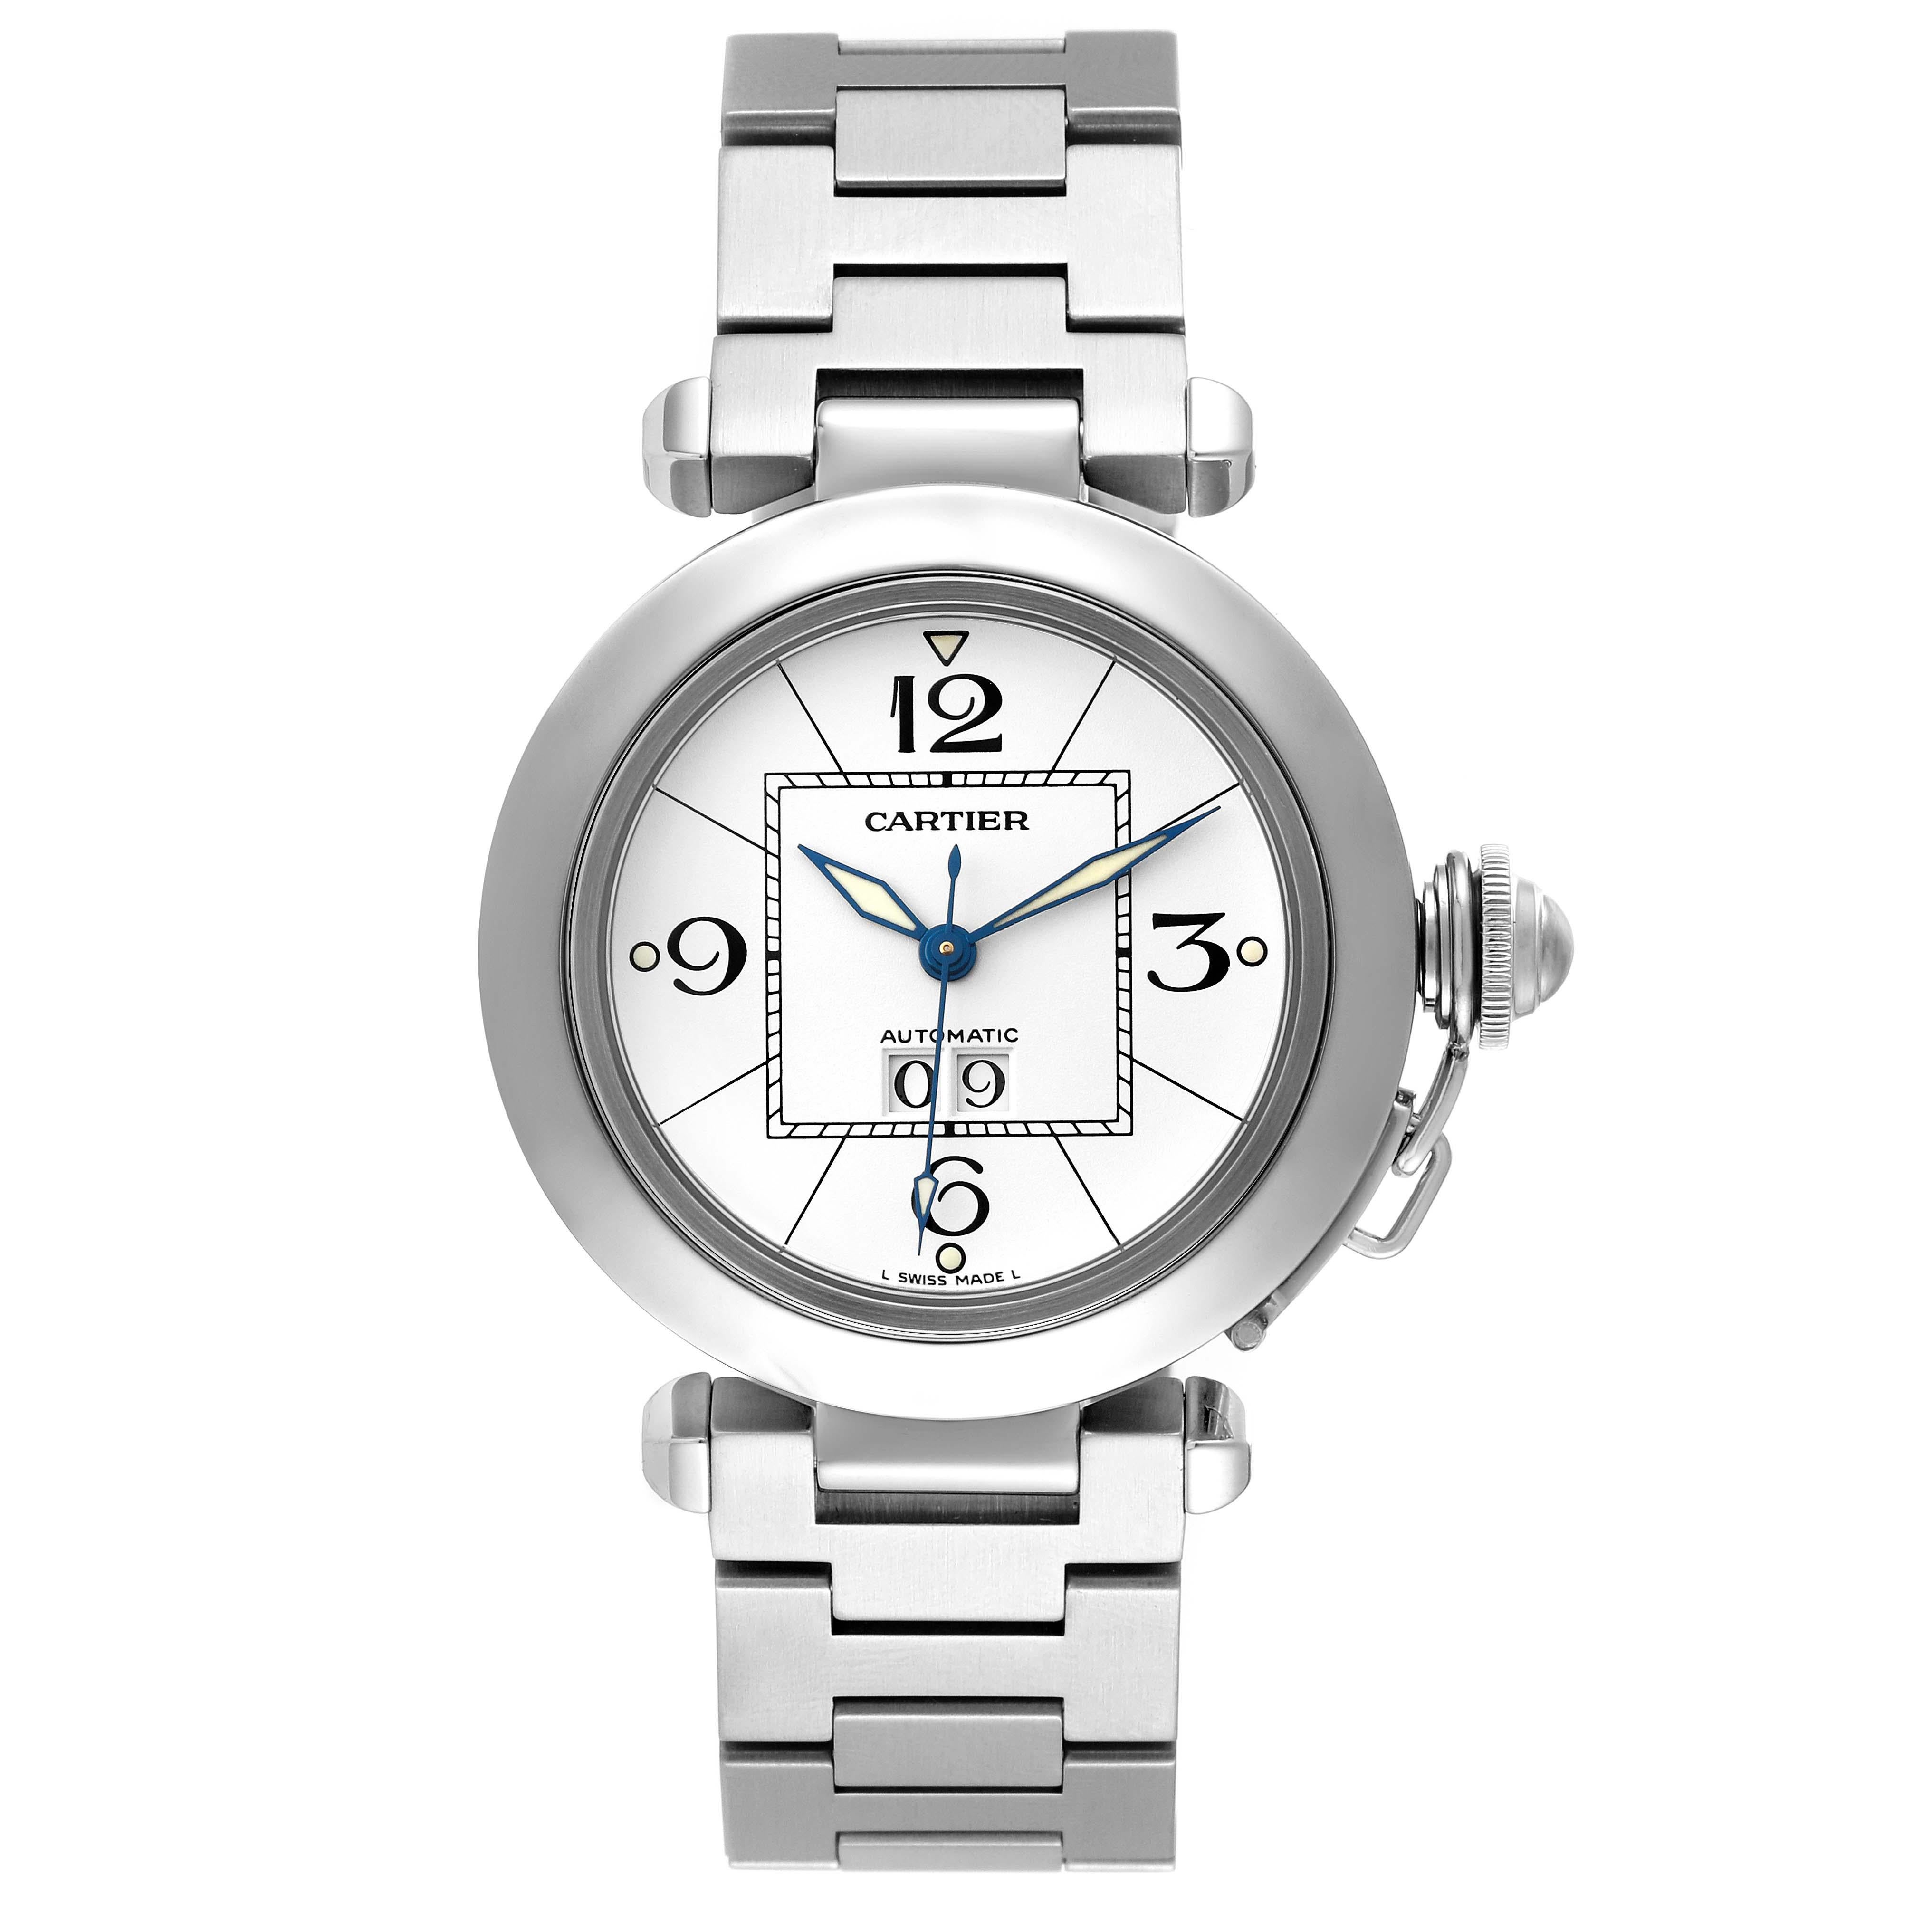 Cartier Pasha C Big Date Midsize Steel White Dial Mens Watch W31055M7 Box Papers For Sale 1